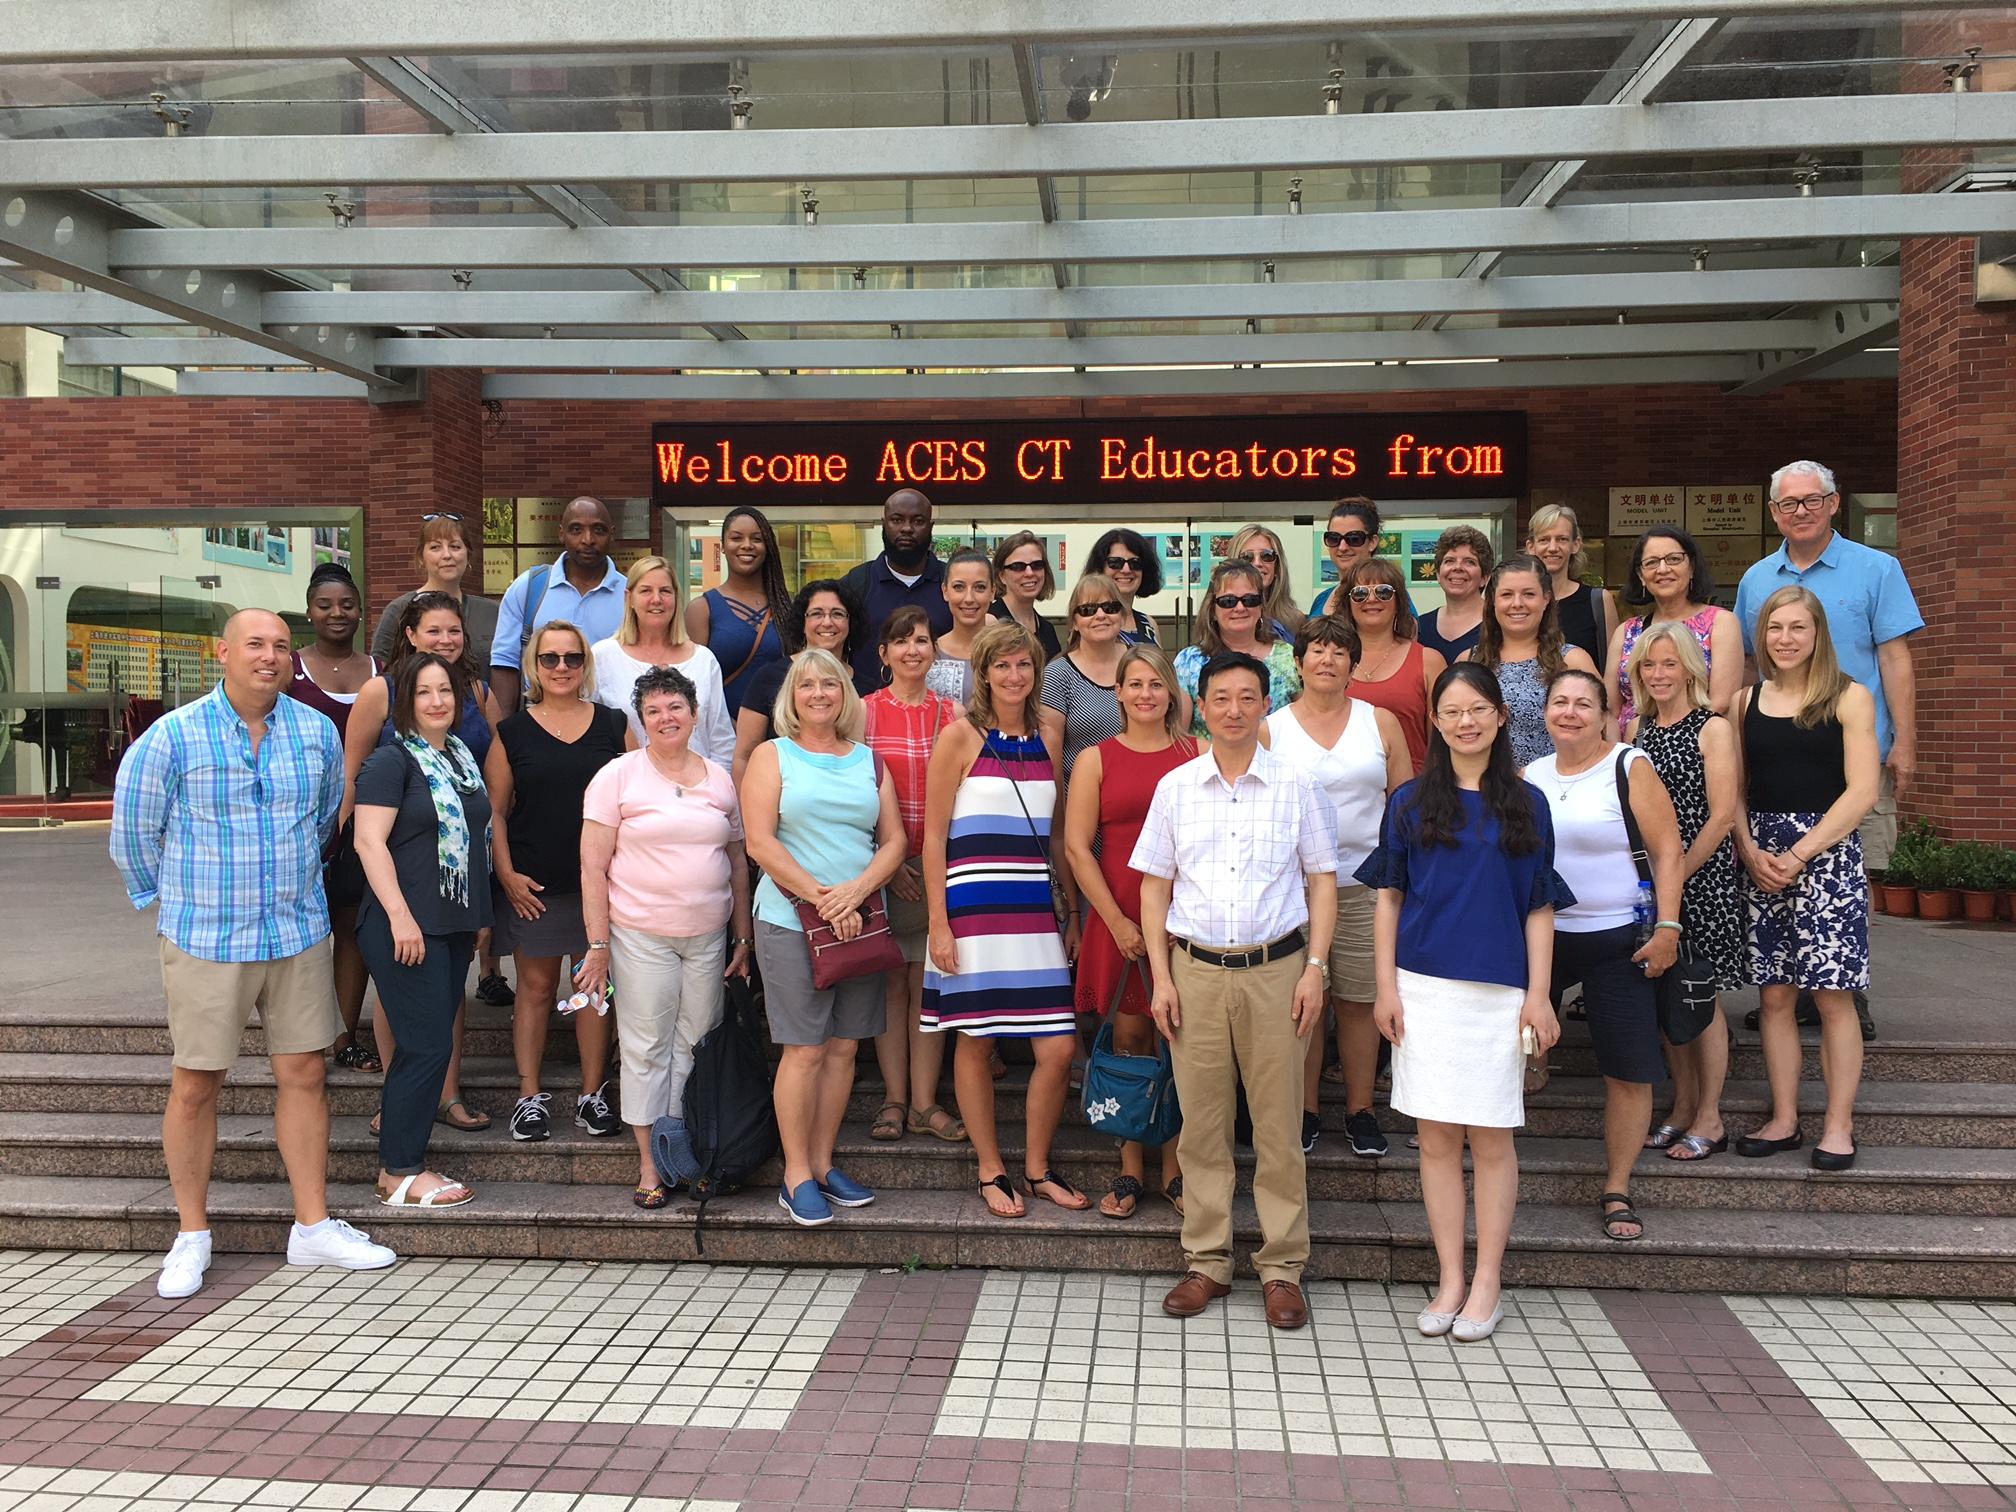 The entire ACES ECA educators field study group pose for a photo in front of a sign welcoming them.